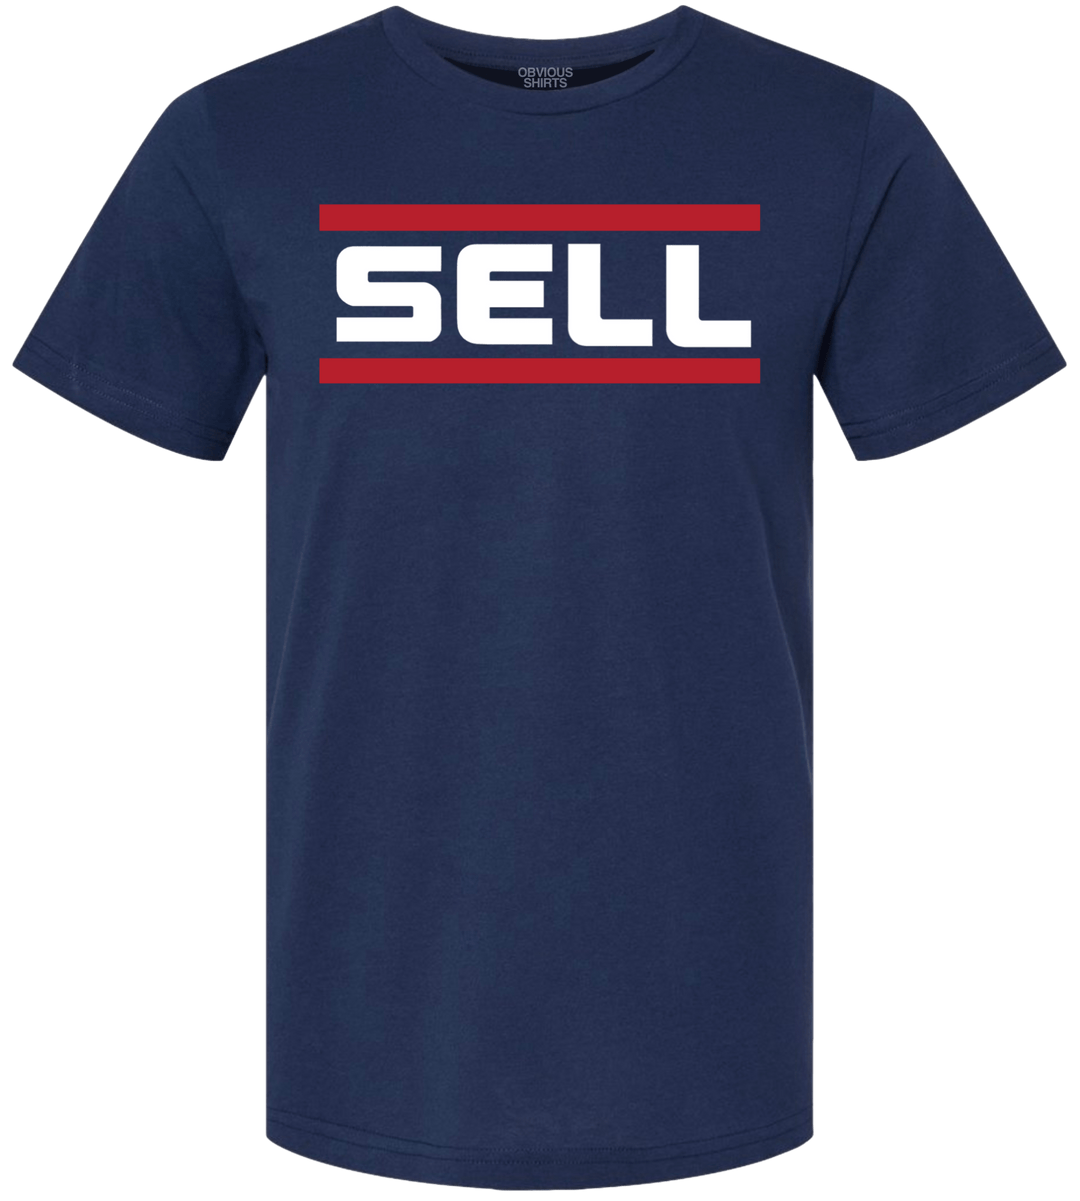 SELL. - OBVIOUS SHIRTS